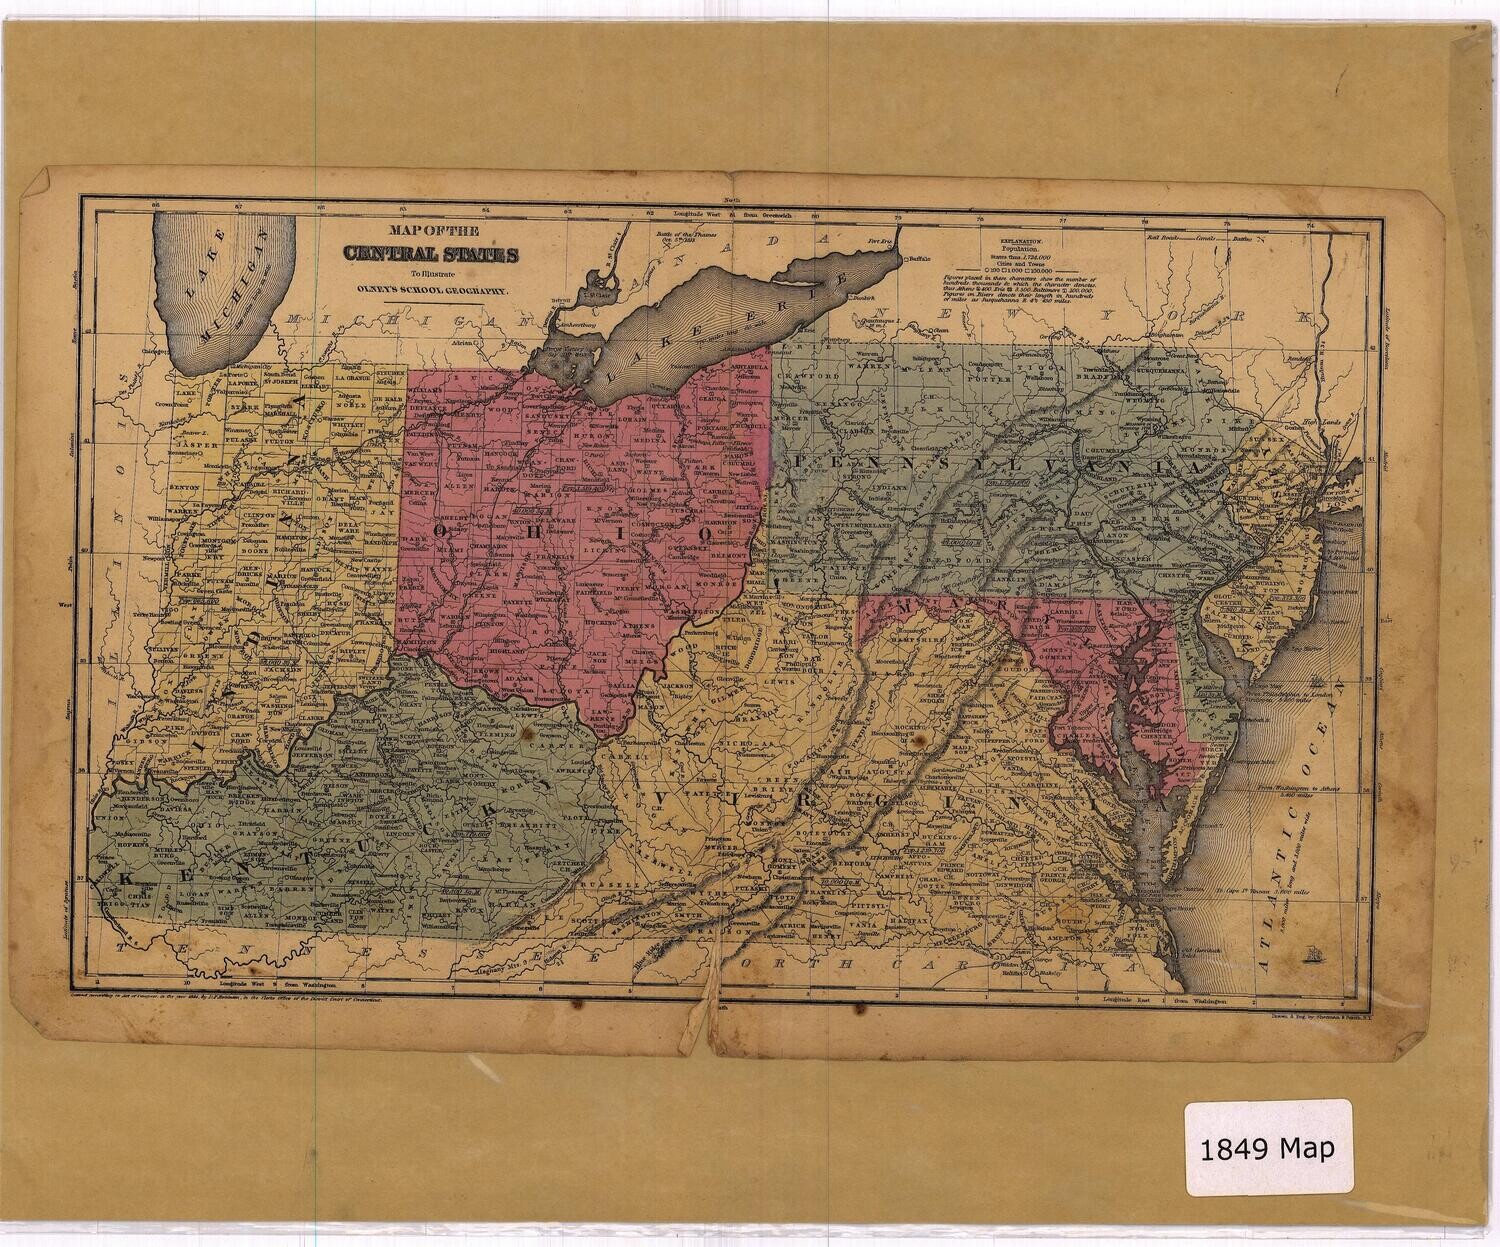 1849 (1844) Map of the Central States by Olney